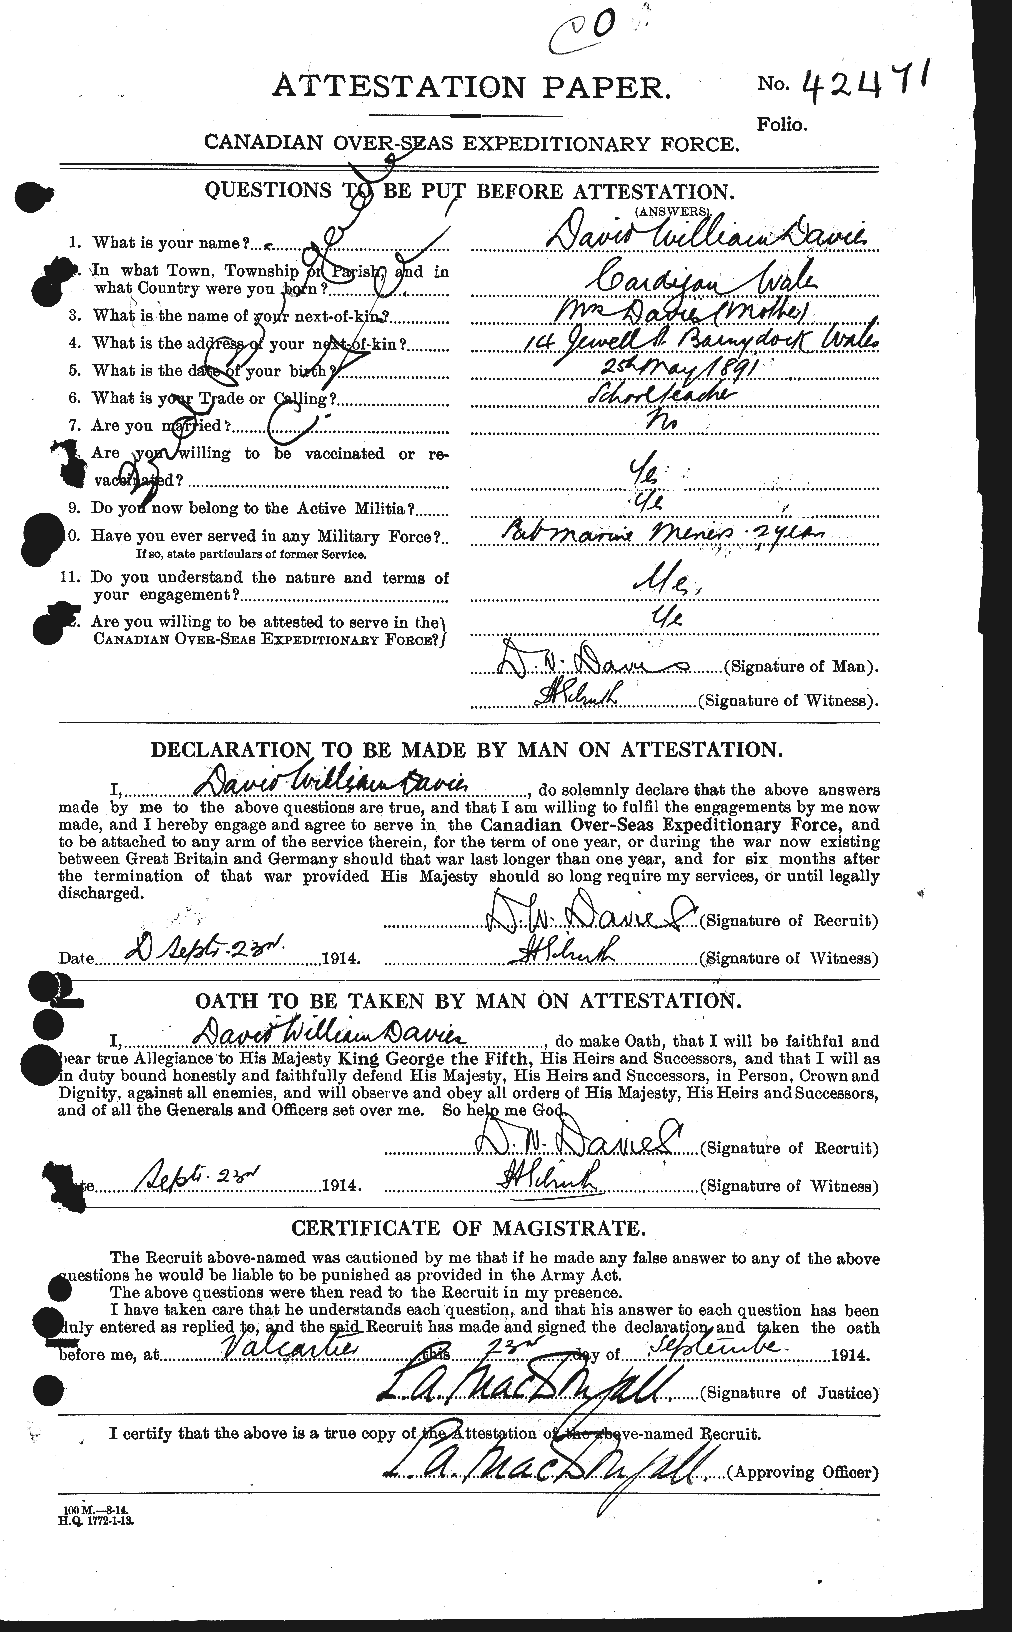 Personnel Records of the First World War - CEF 278818a